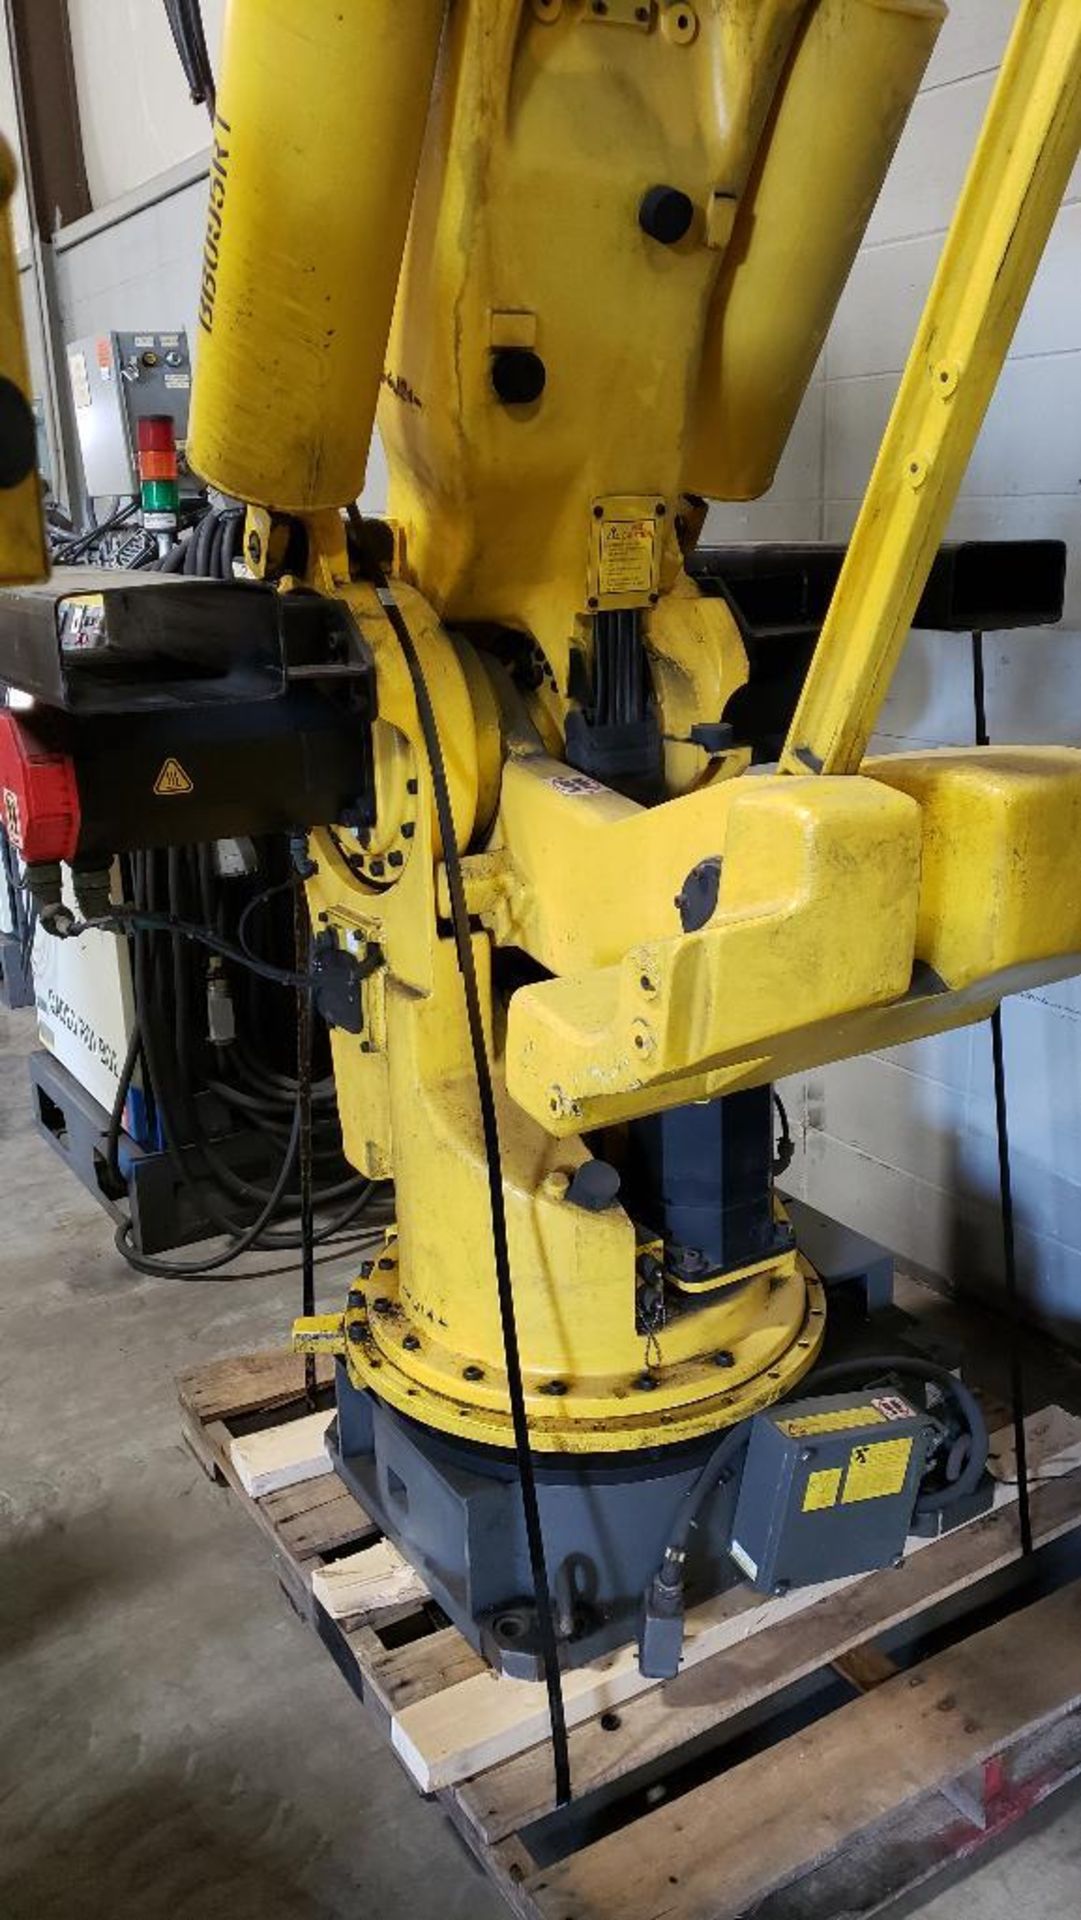 Fanuc S-420iW robot with R-J2 controller. - Image 11 of 14